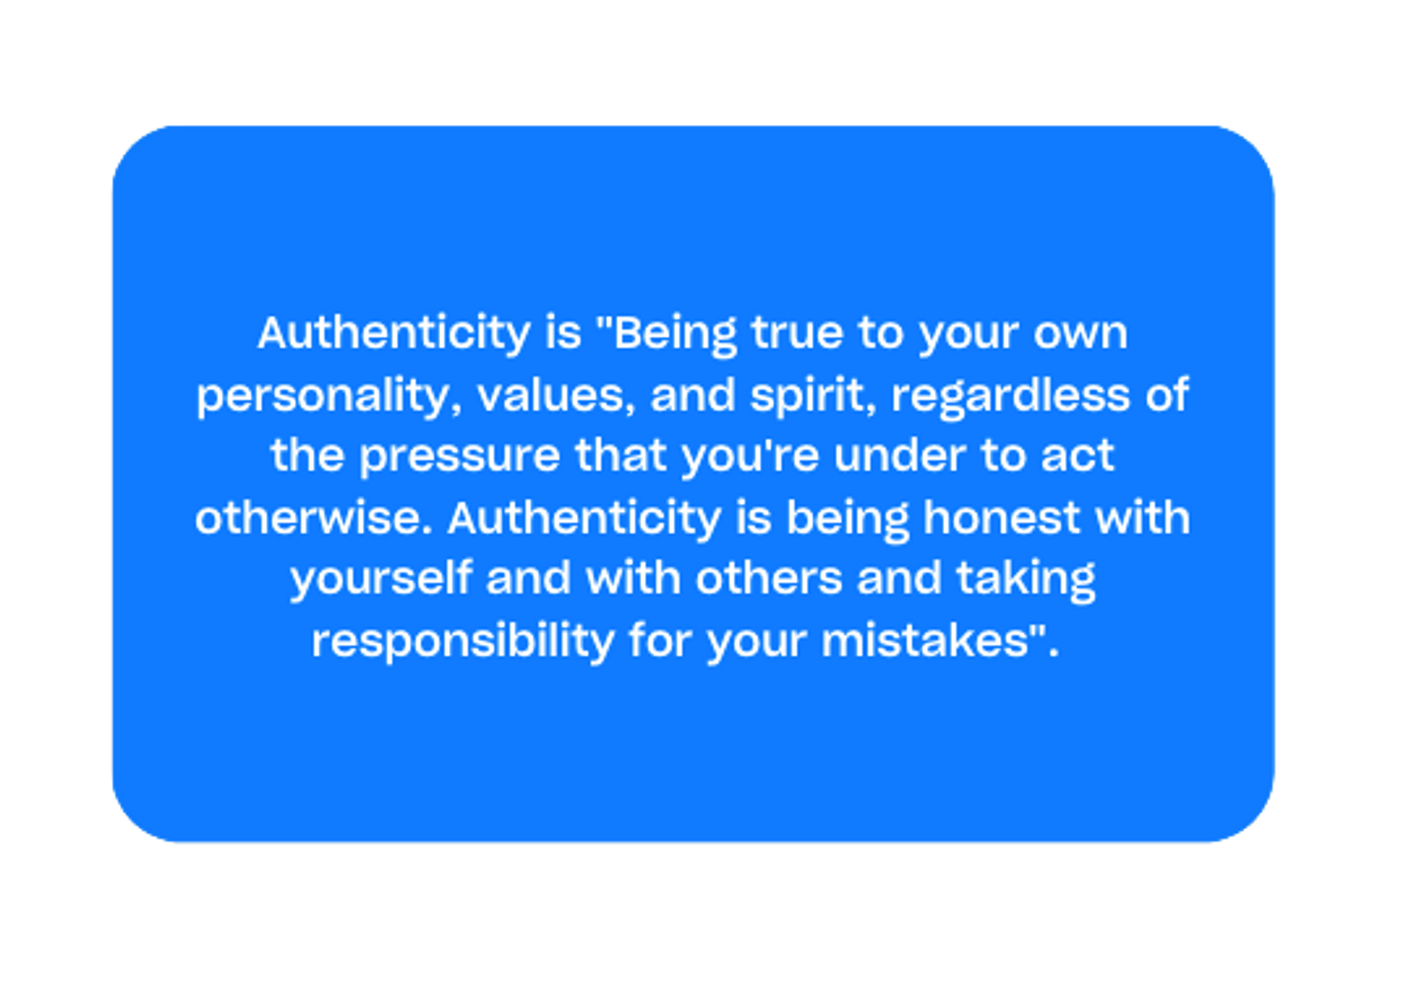 Authenticity quote blue on beige background